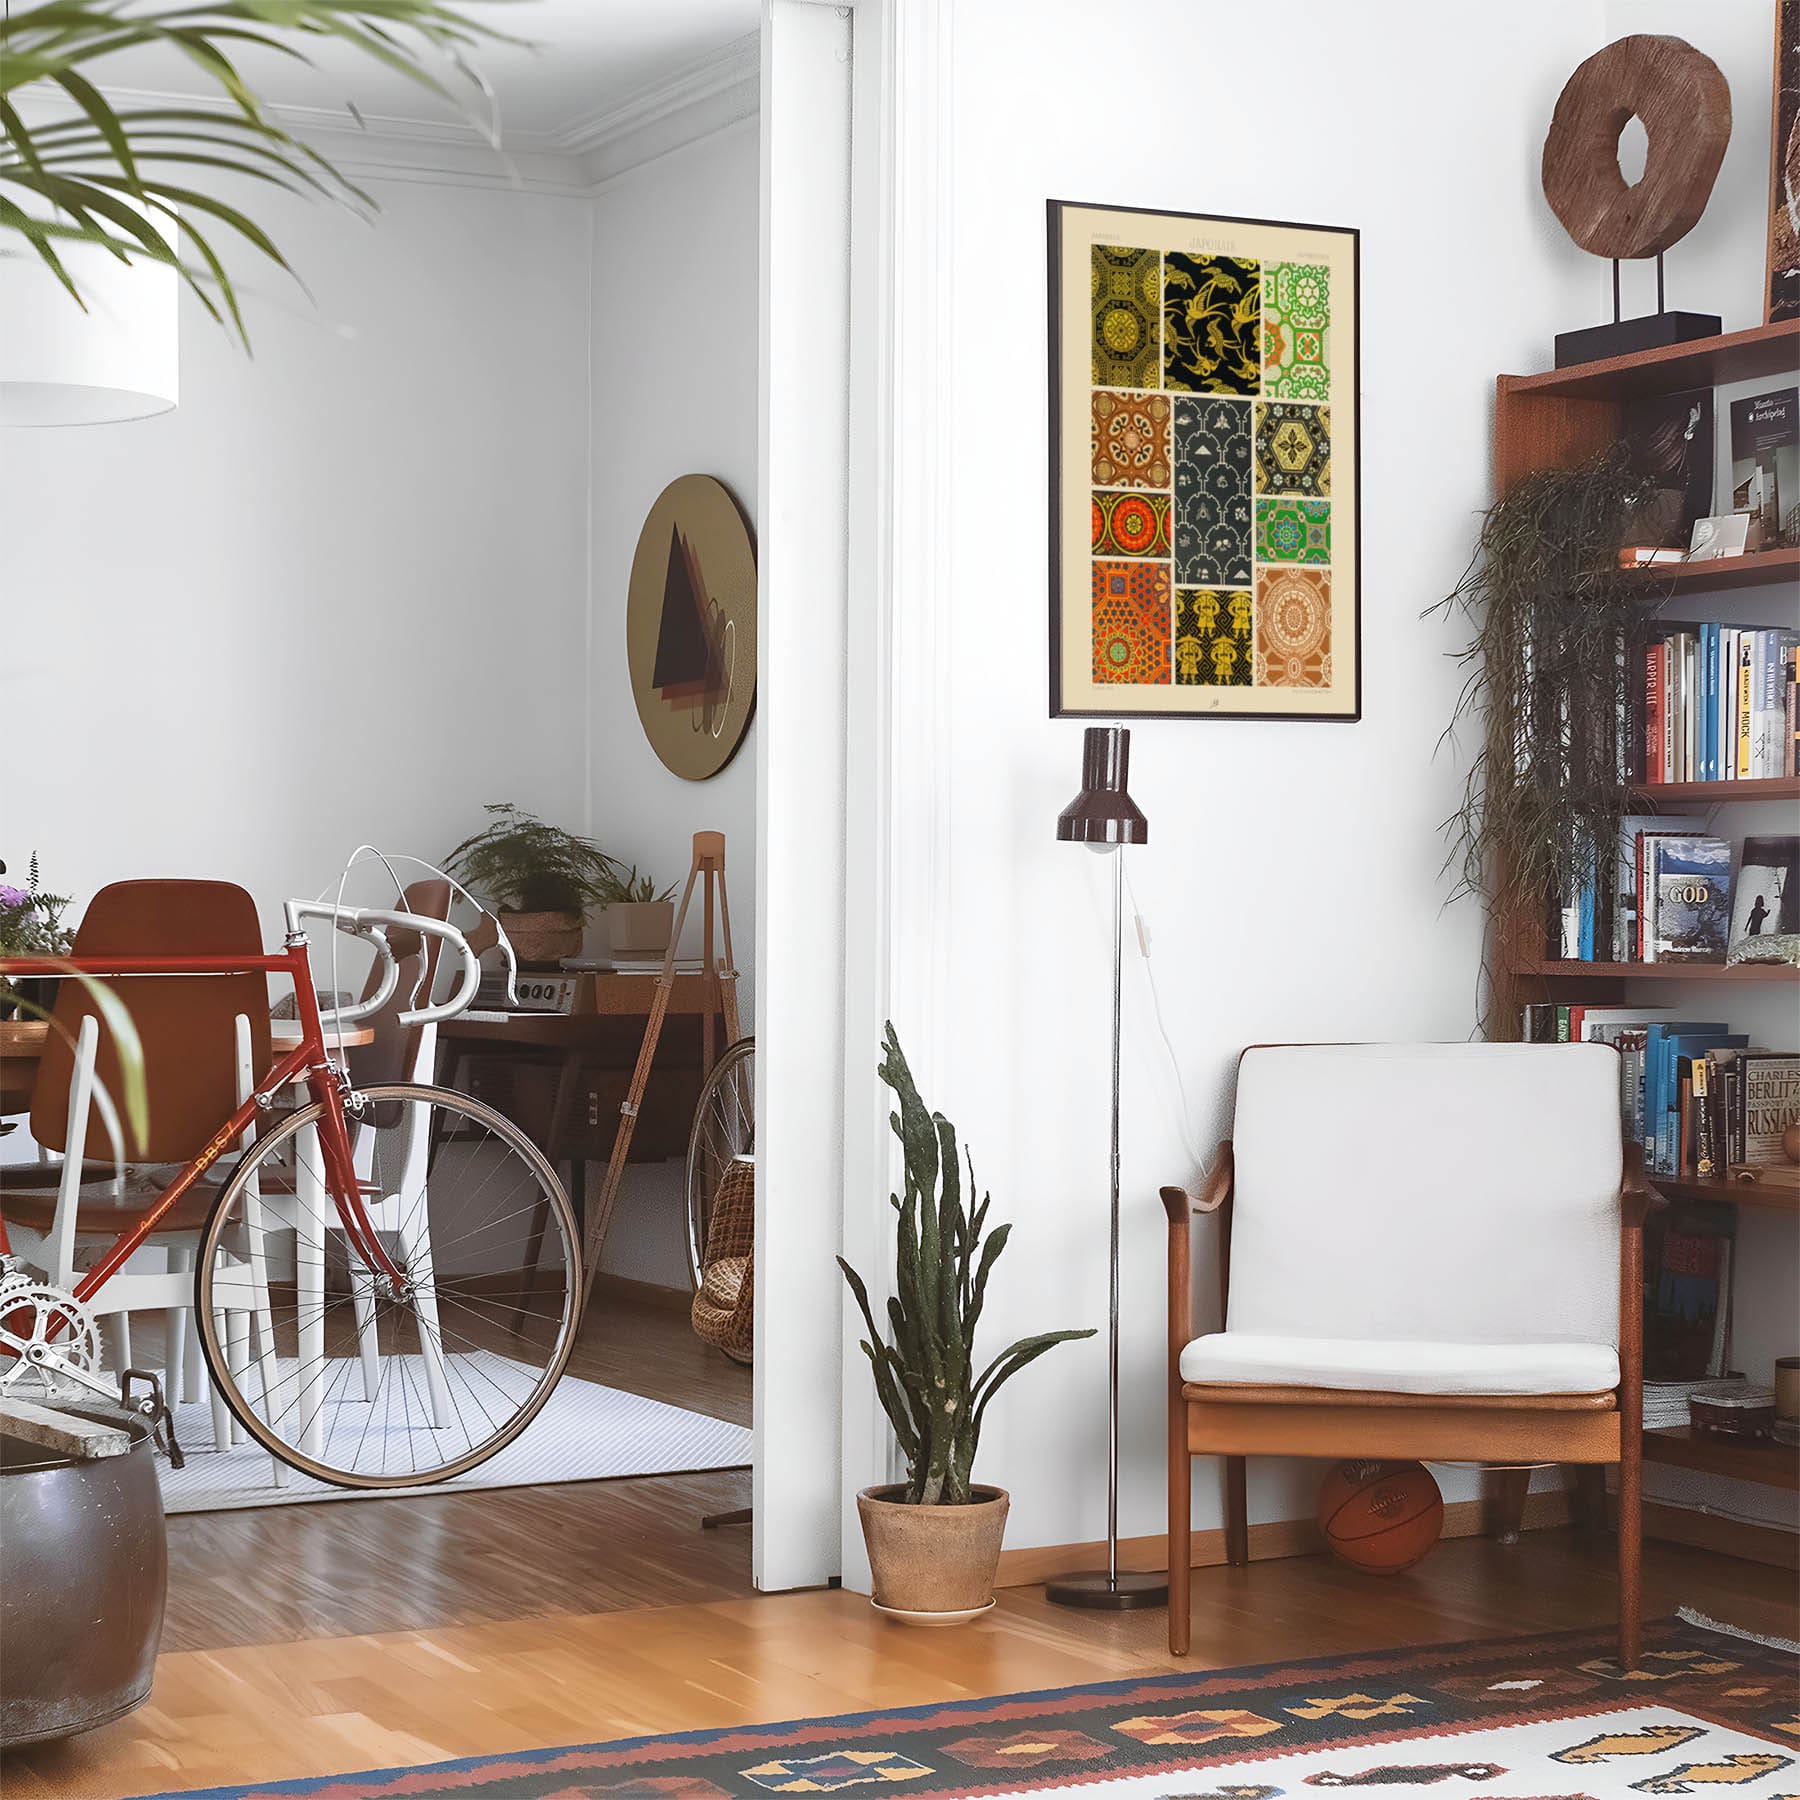 Eclectic living room with a road bike, bookshelf and house plants that features framed artwork of a Pattern Samples above a chair and lamp